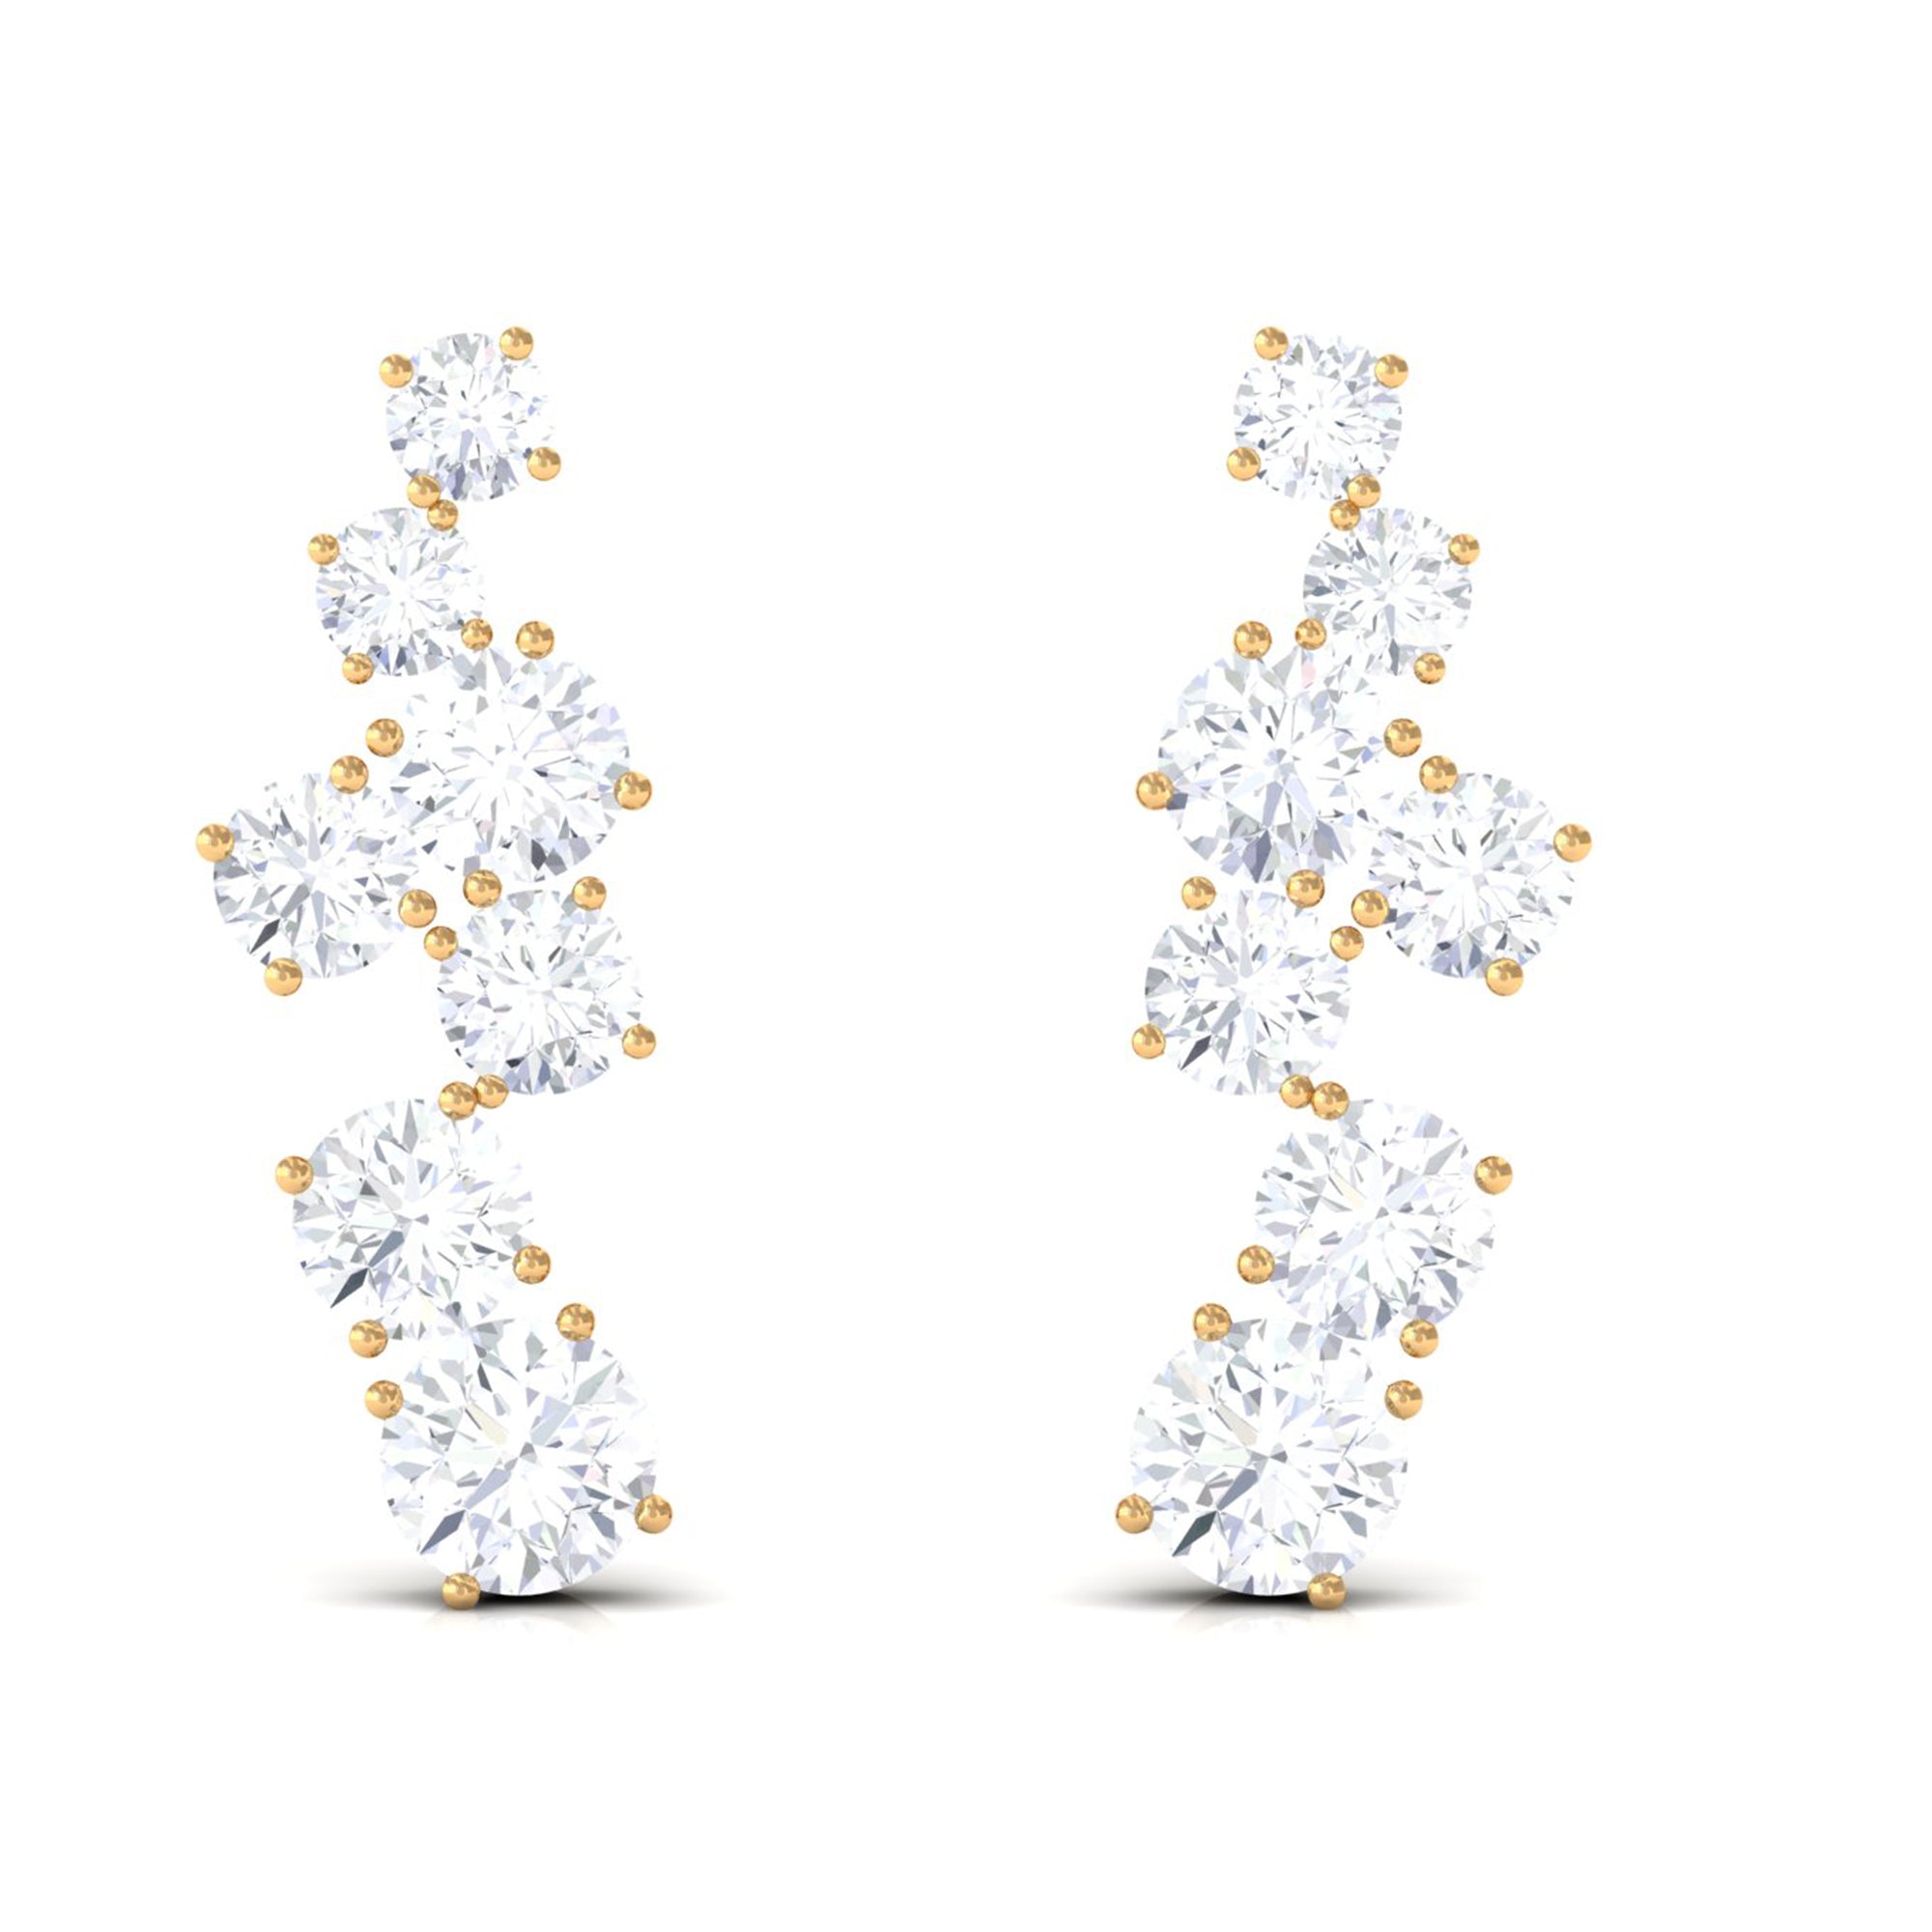 Natural Round Diamond Climber Earrings Diamond - ( HI-SI ) - Color and Clarity - Rosec Jewels